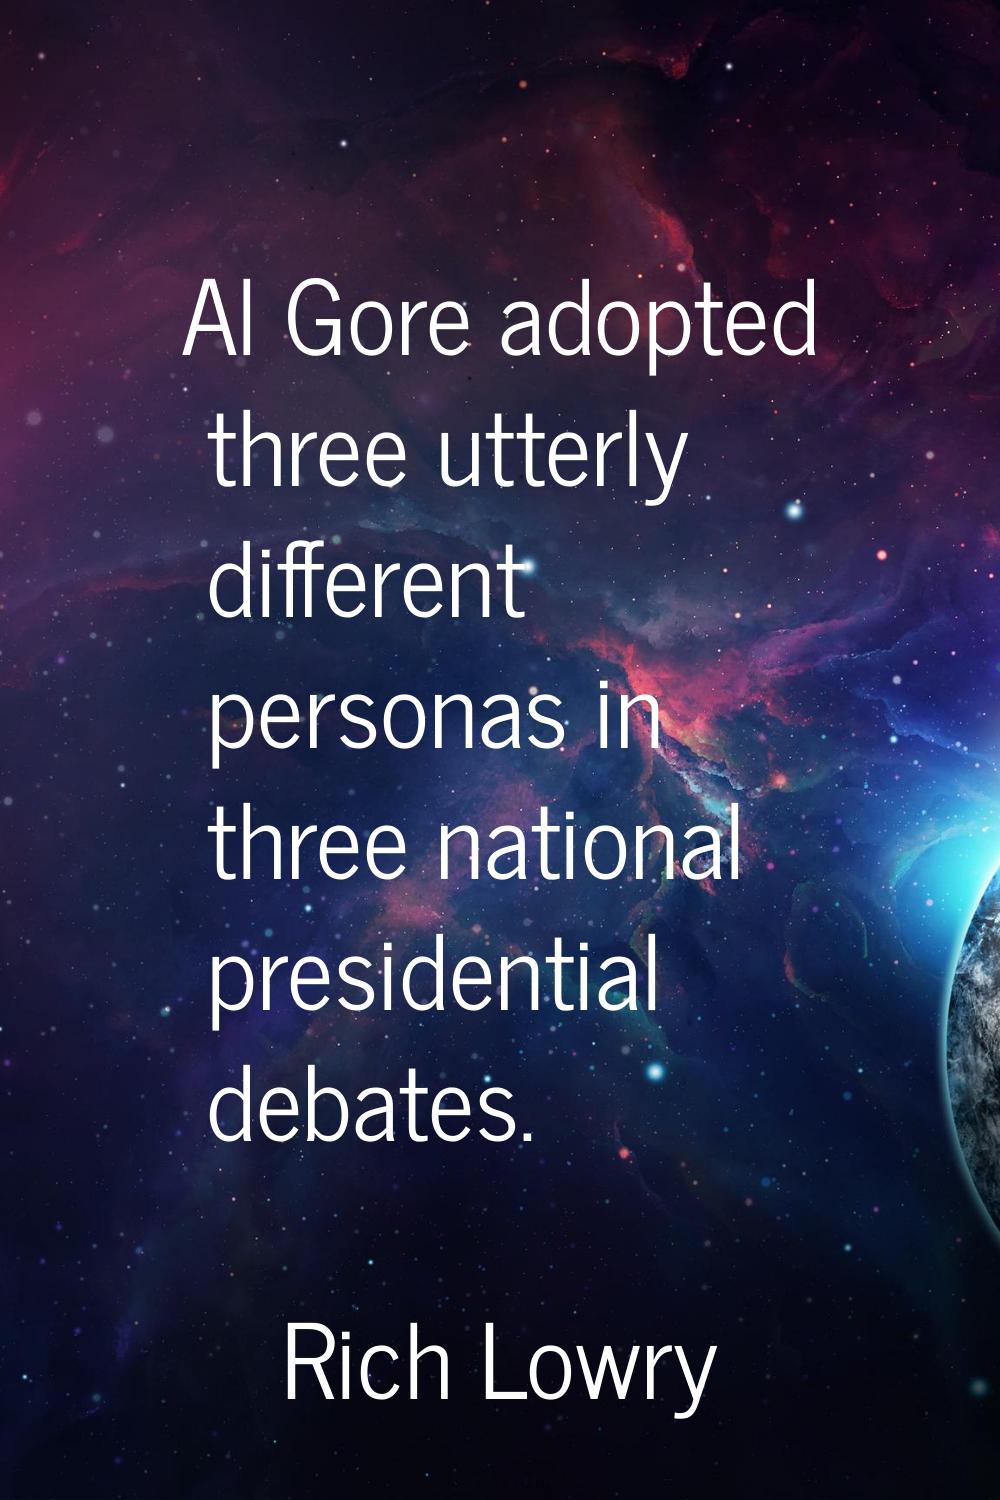 Al Gore adopted three utterly different personas in three national presidential debates.